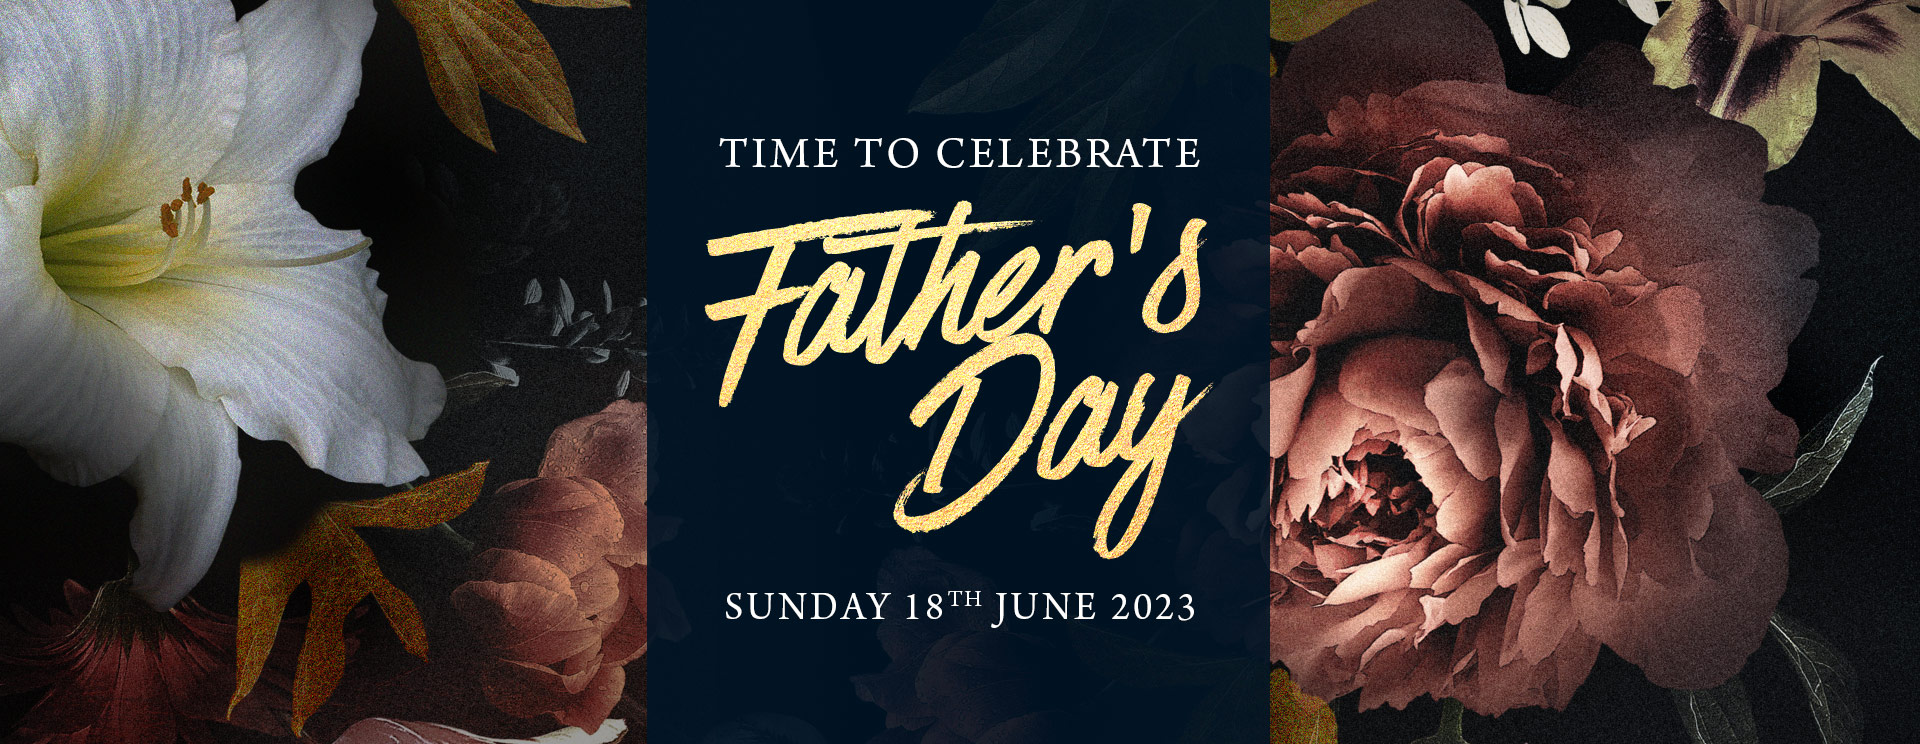 Fathers Day at The Lyttelton Arms